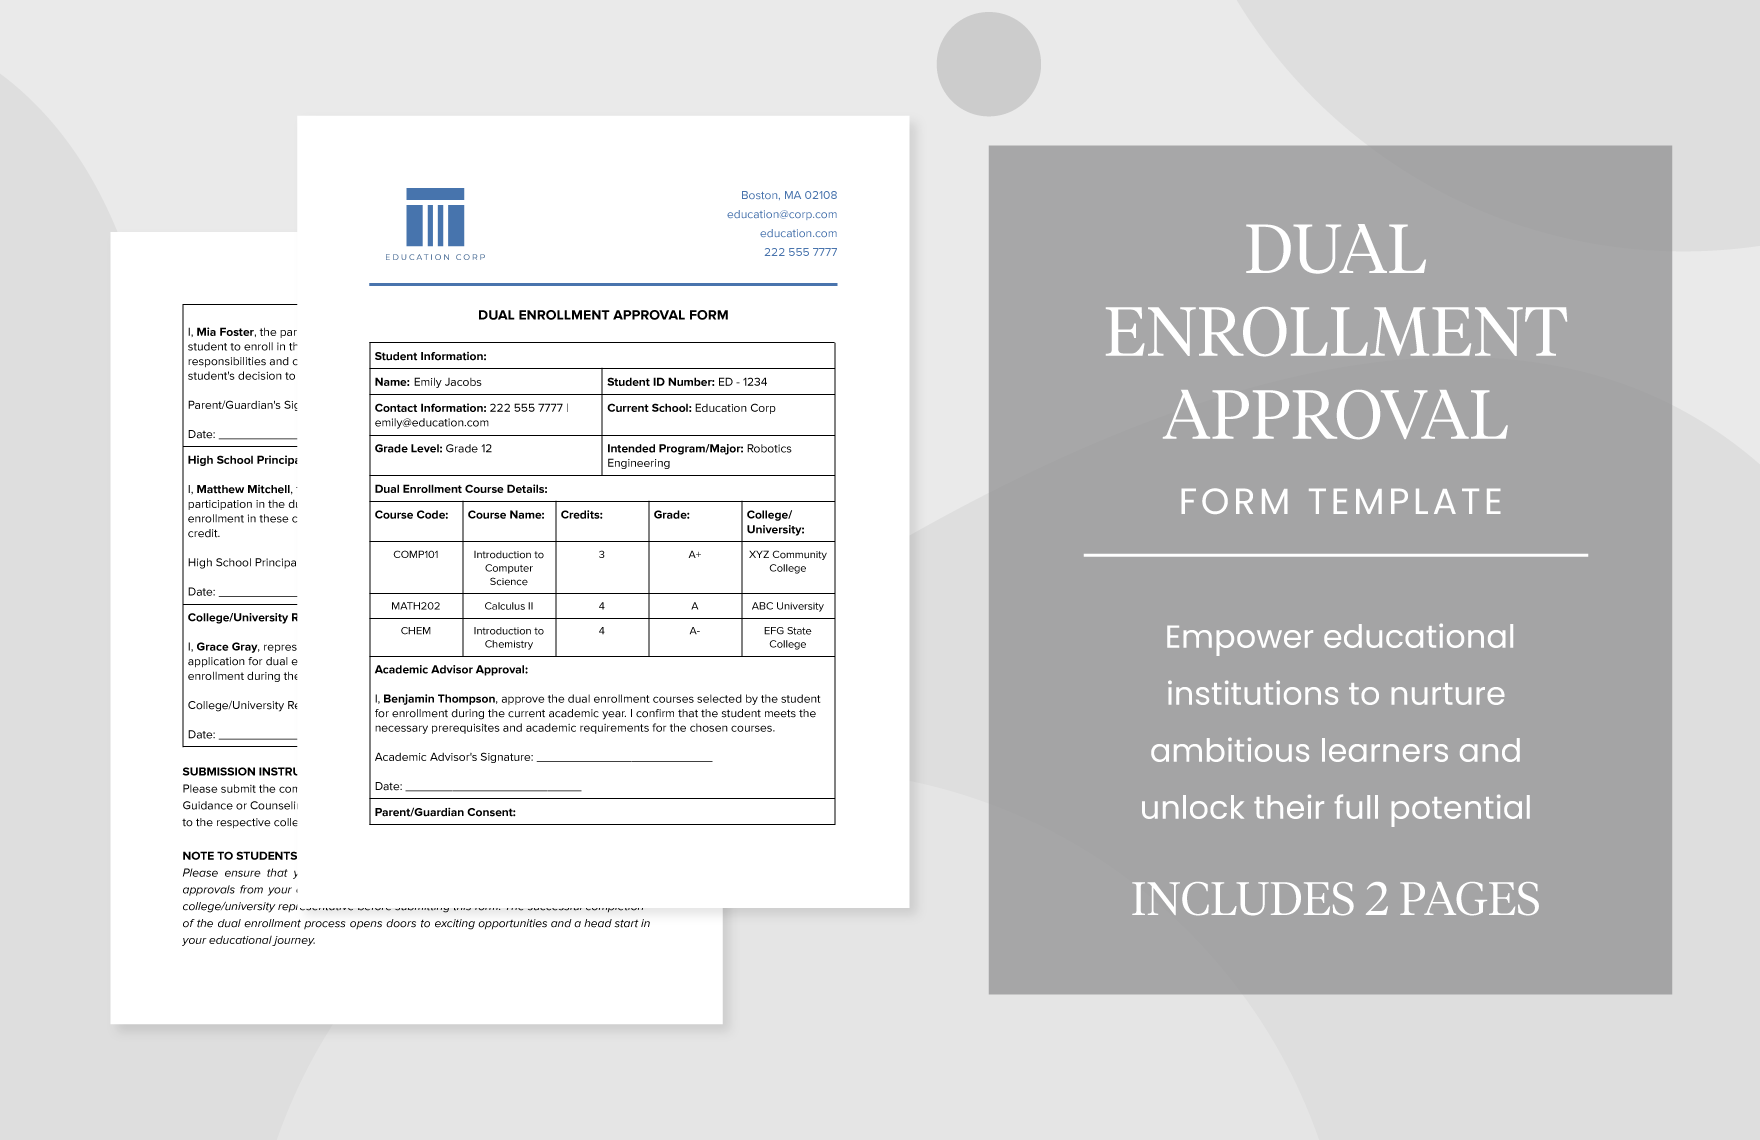 Dual Enrollment Approval Form Template in Word, Google Docs, PDF